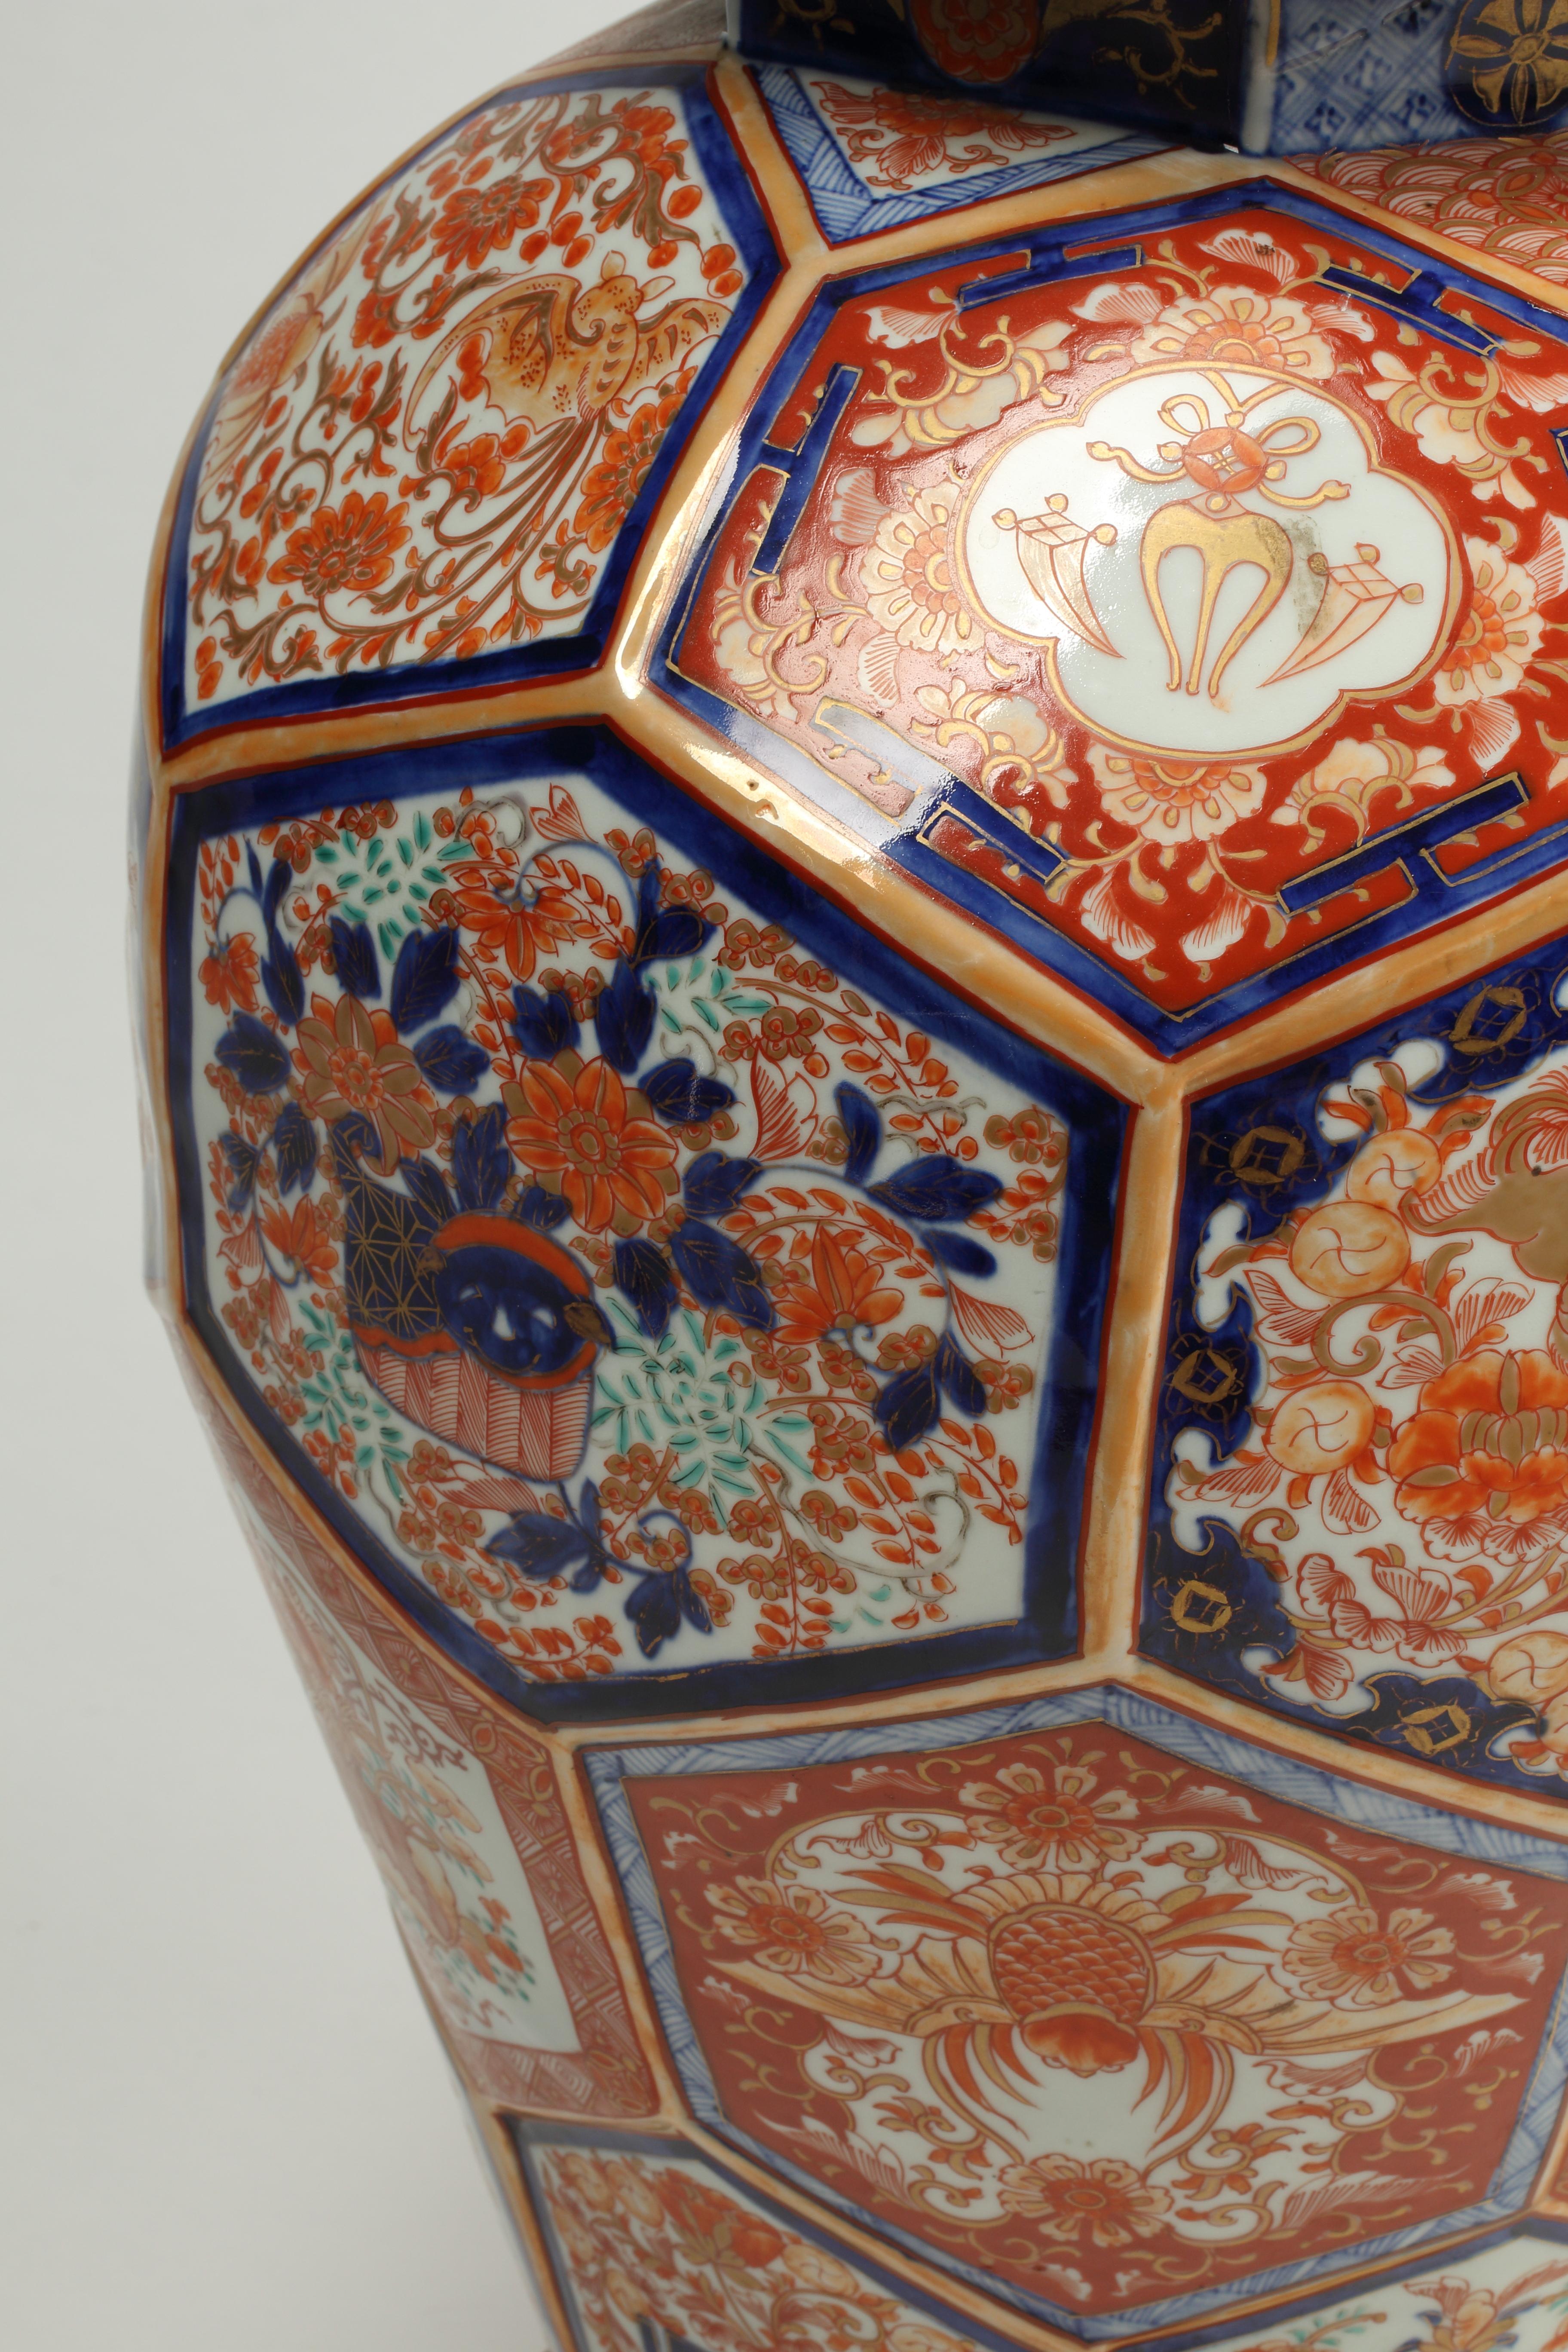 Pair of Large 19th Century Japanese Imari Porcelain Temple Jars with Cover In Good Condition For Sale In El Monte, CA